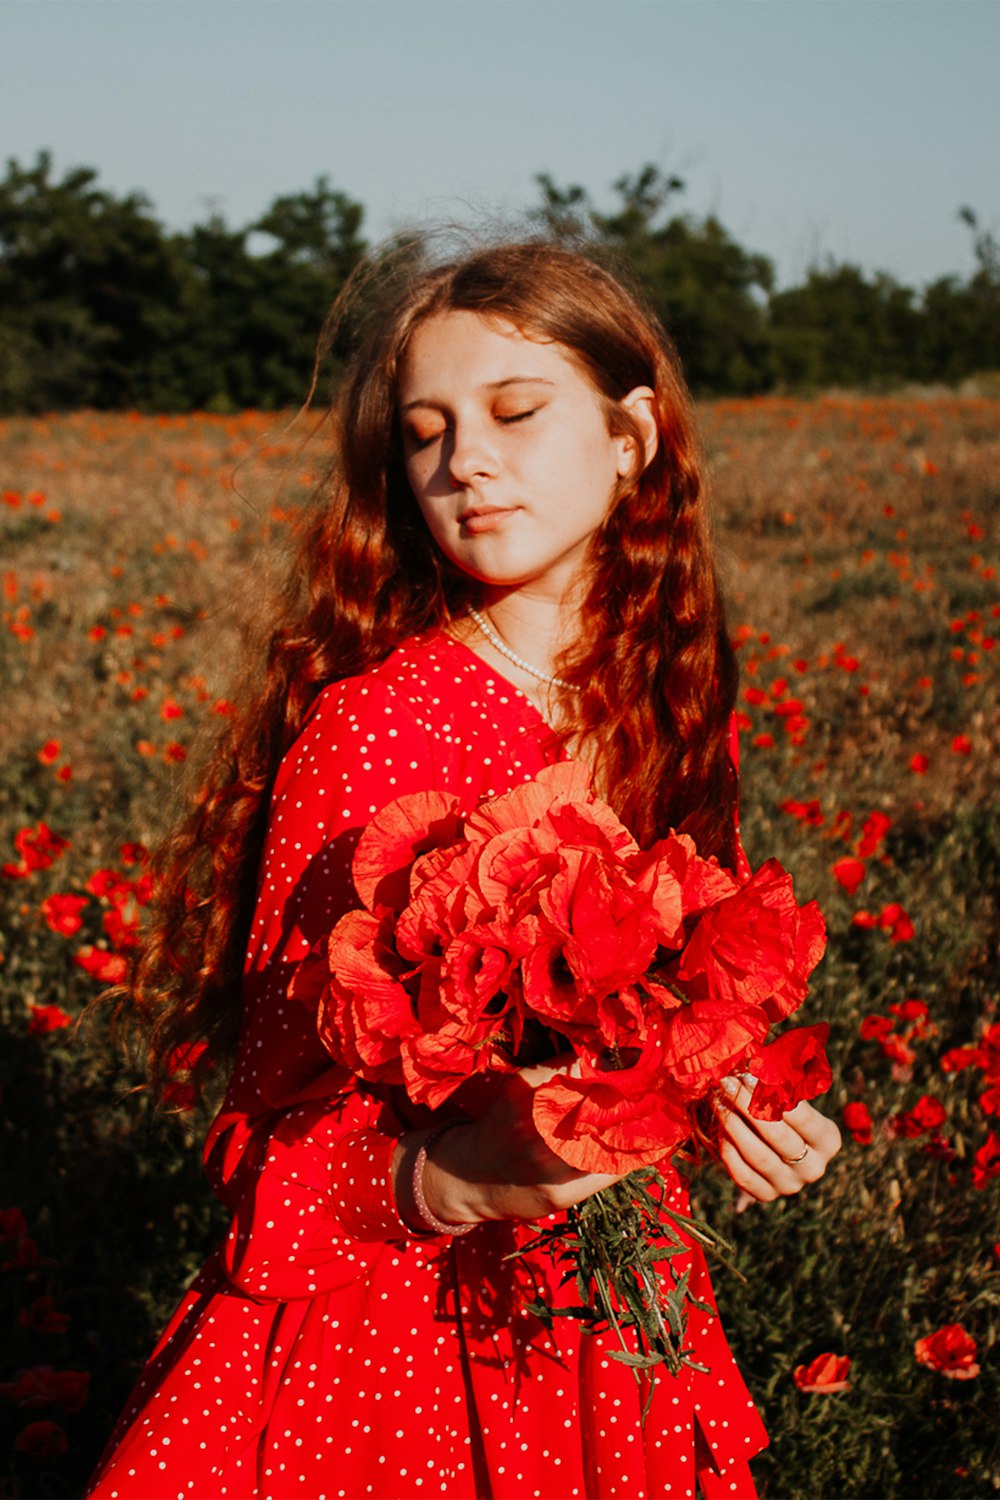 a person in a red dress in a field of flowers